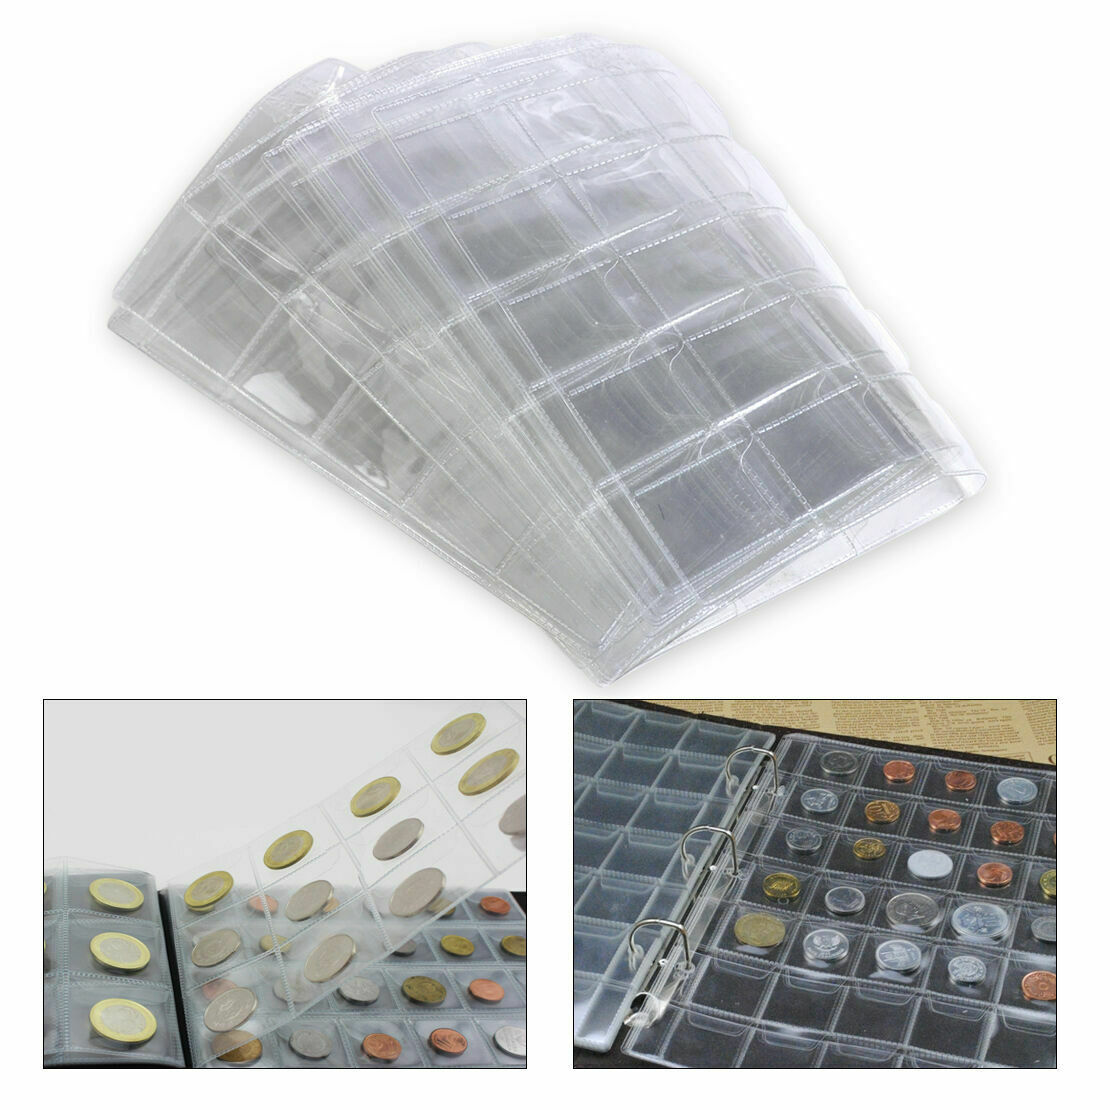 1 Pages 30 Pockets Classic Coin Holders For Storage Collection Album Case